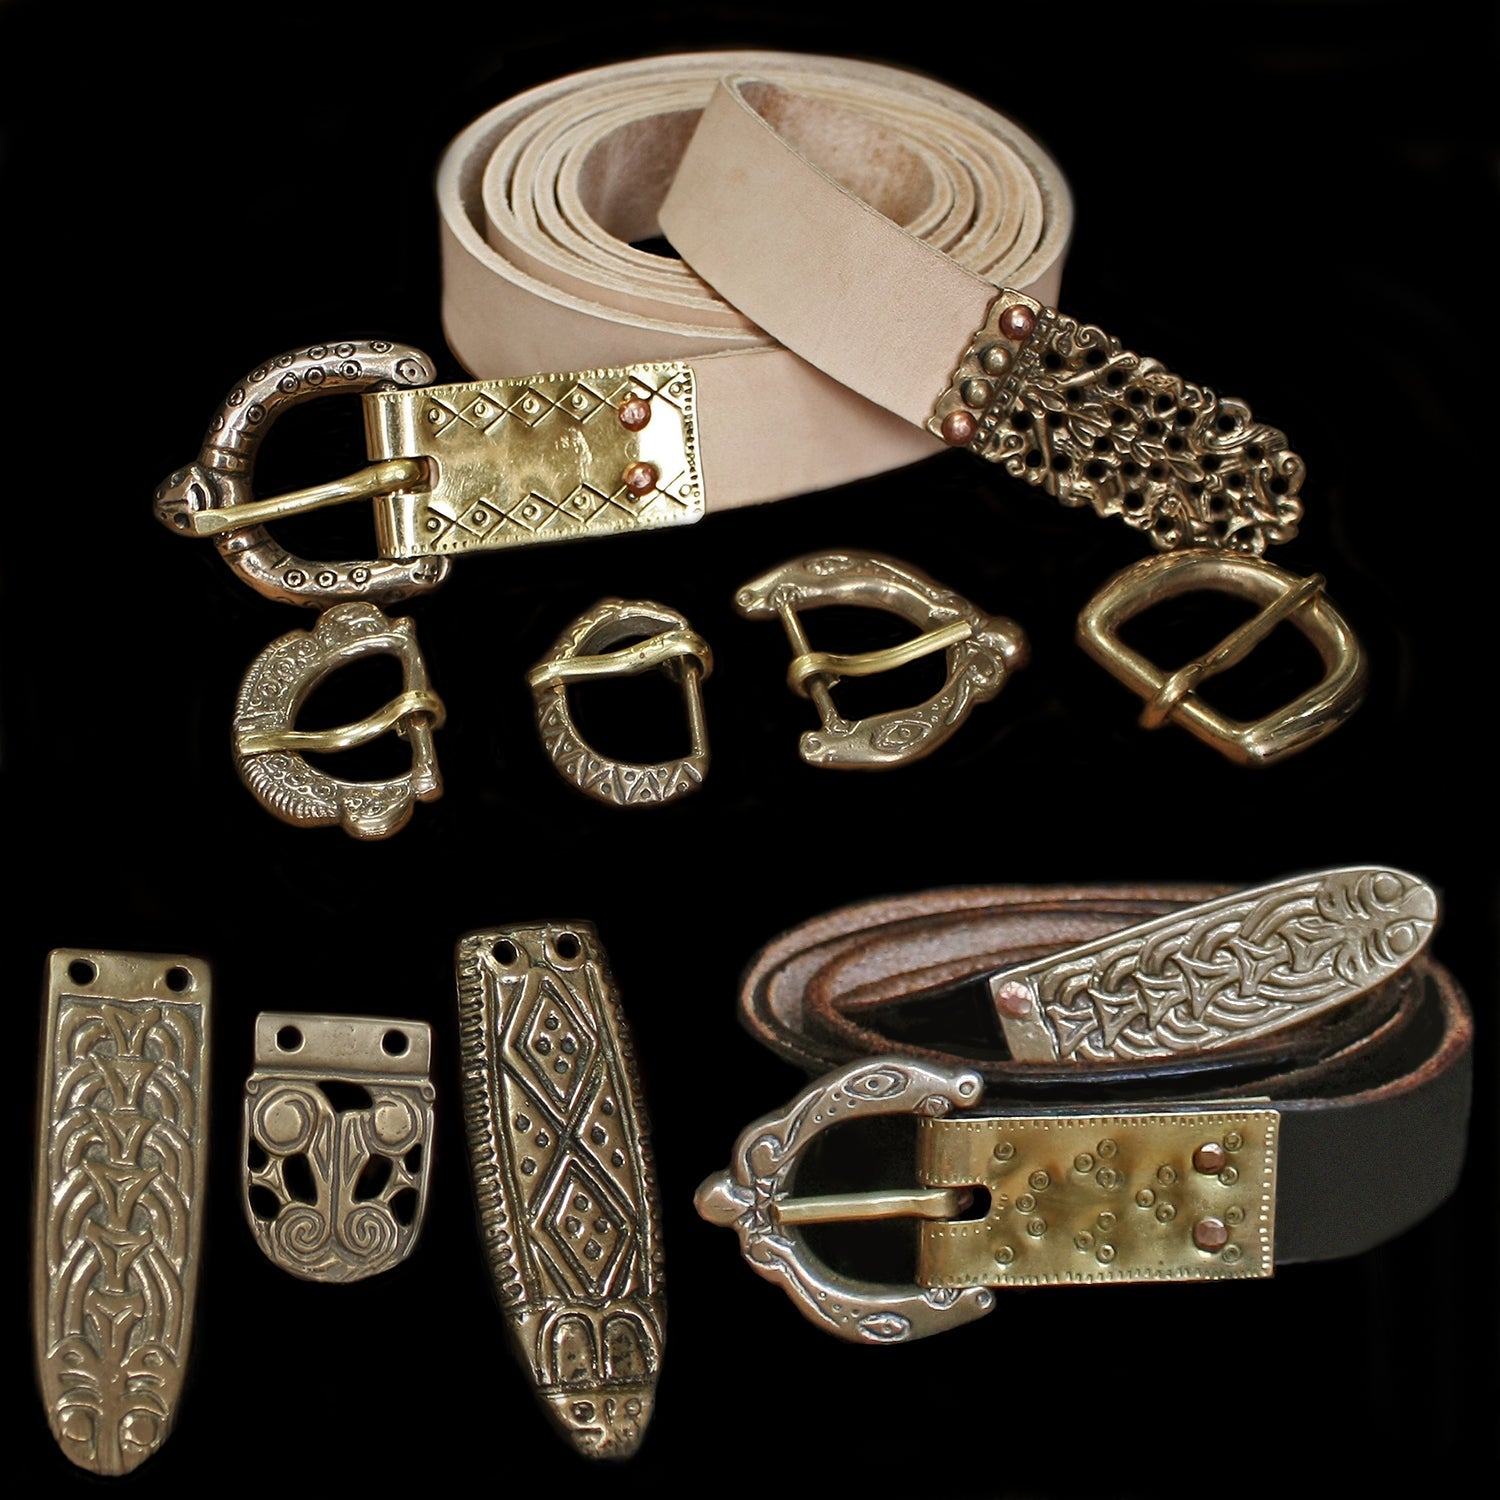 Fully Customisable Handmade Leather Viking Belts with Bronze Replica Fittings - Viking Clothing